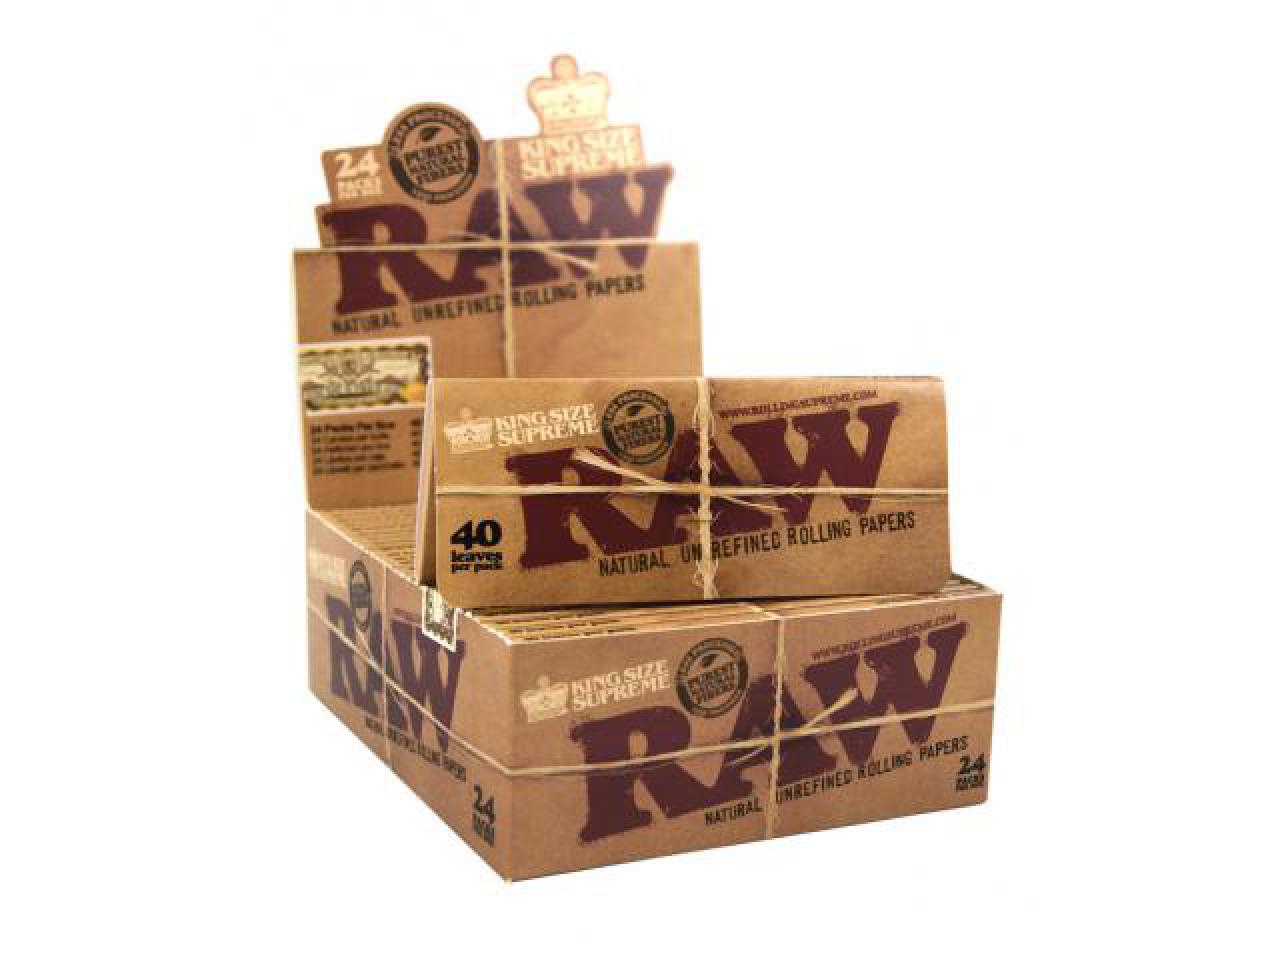 RAW papers | CLASSIC King Size SUPREME Papers 